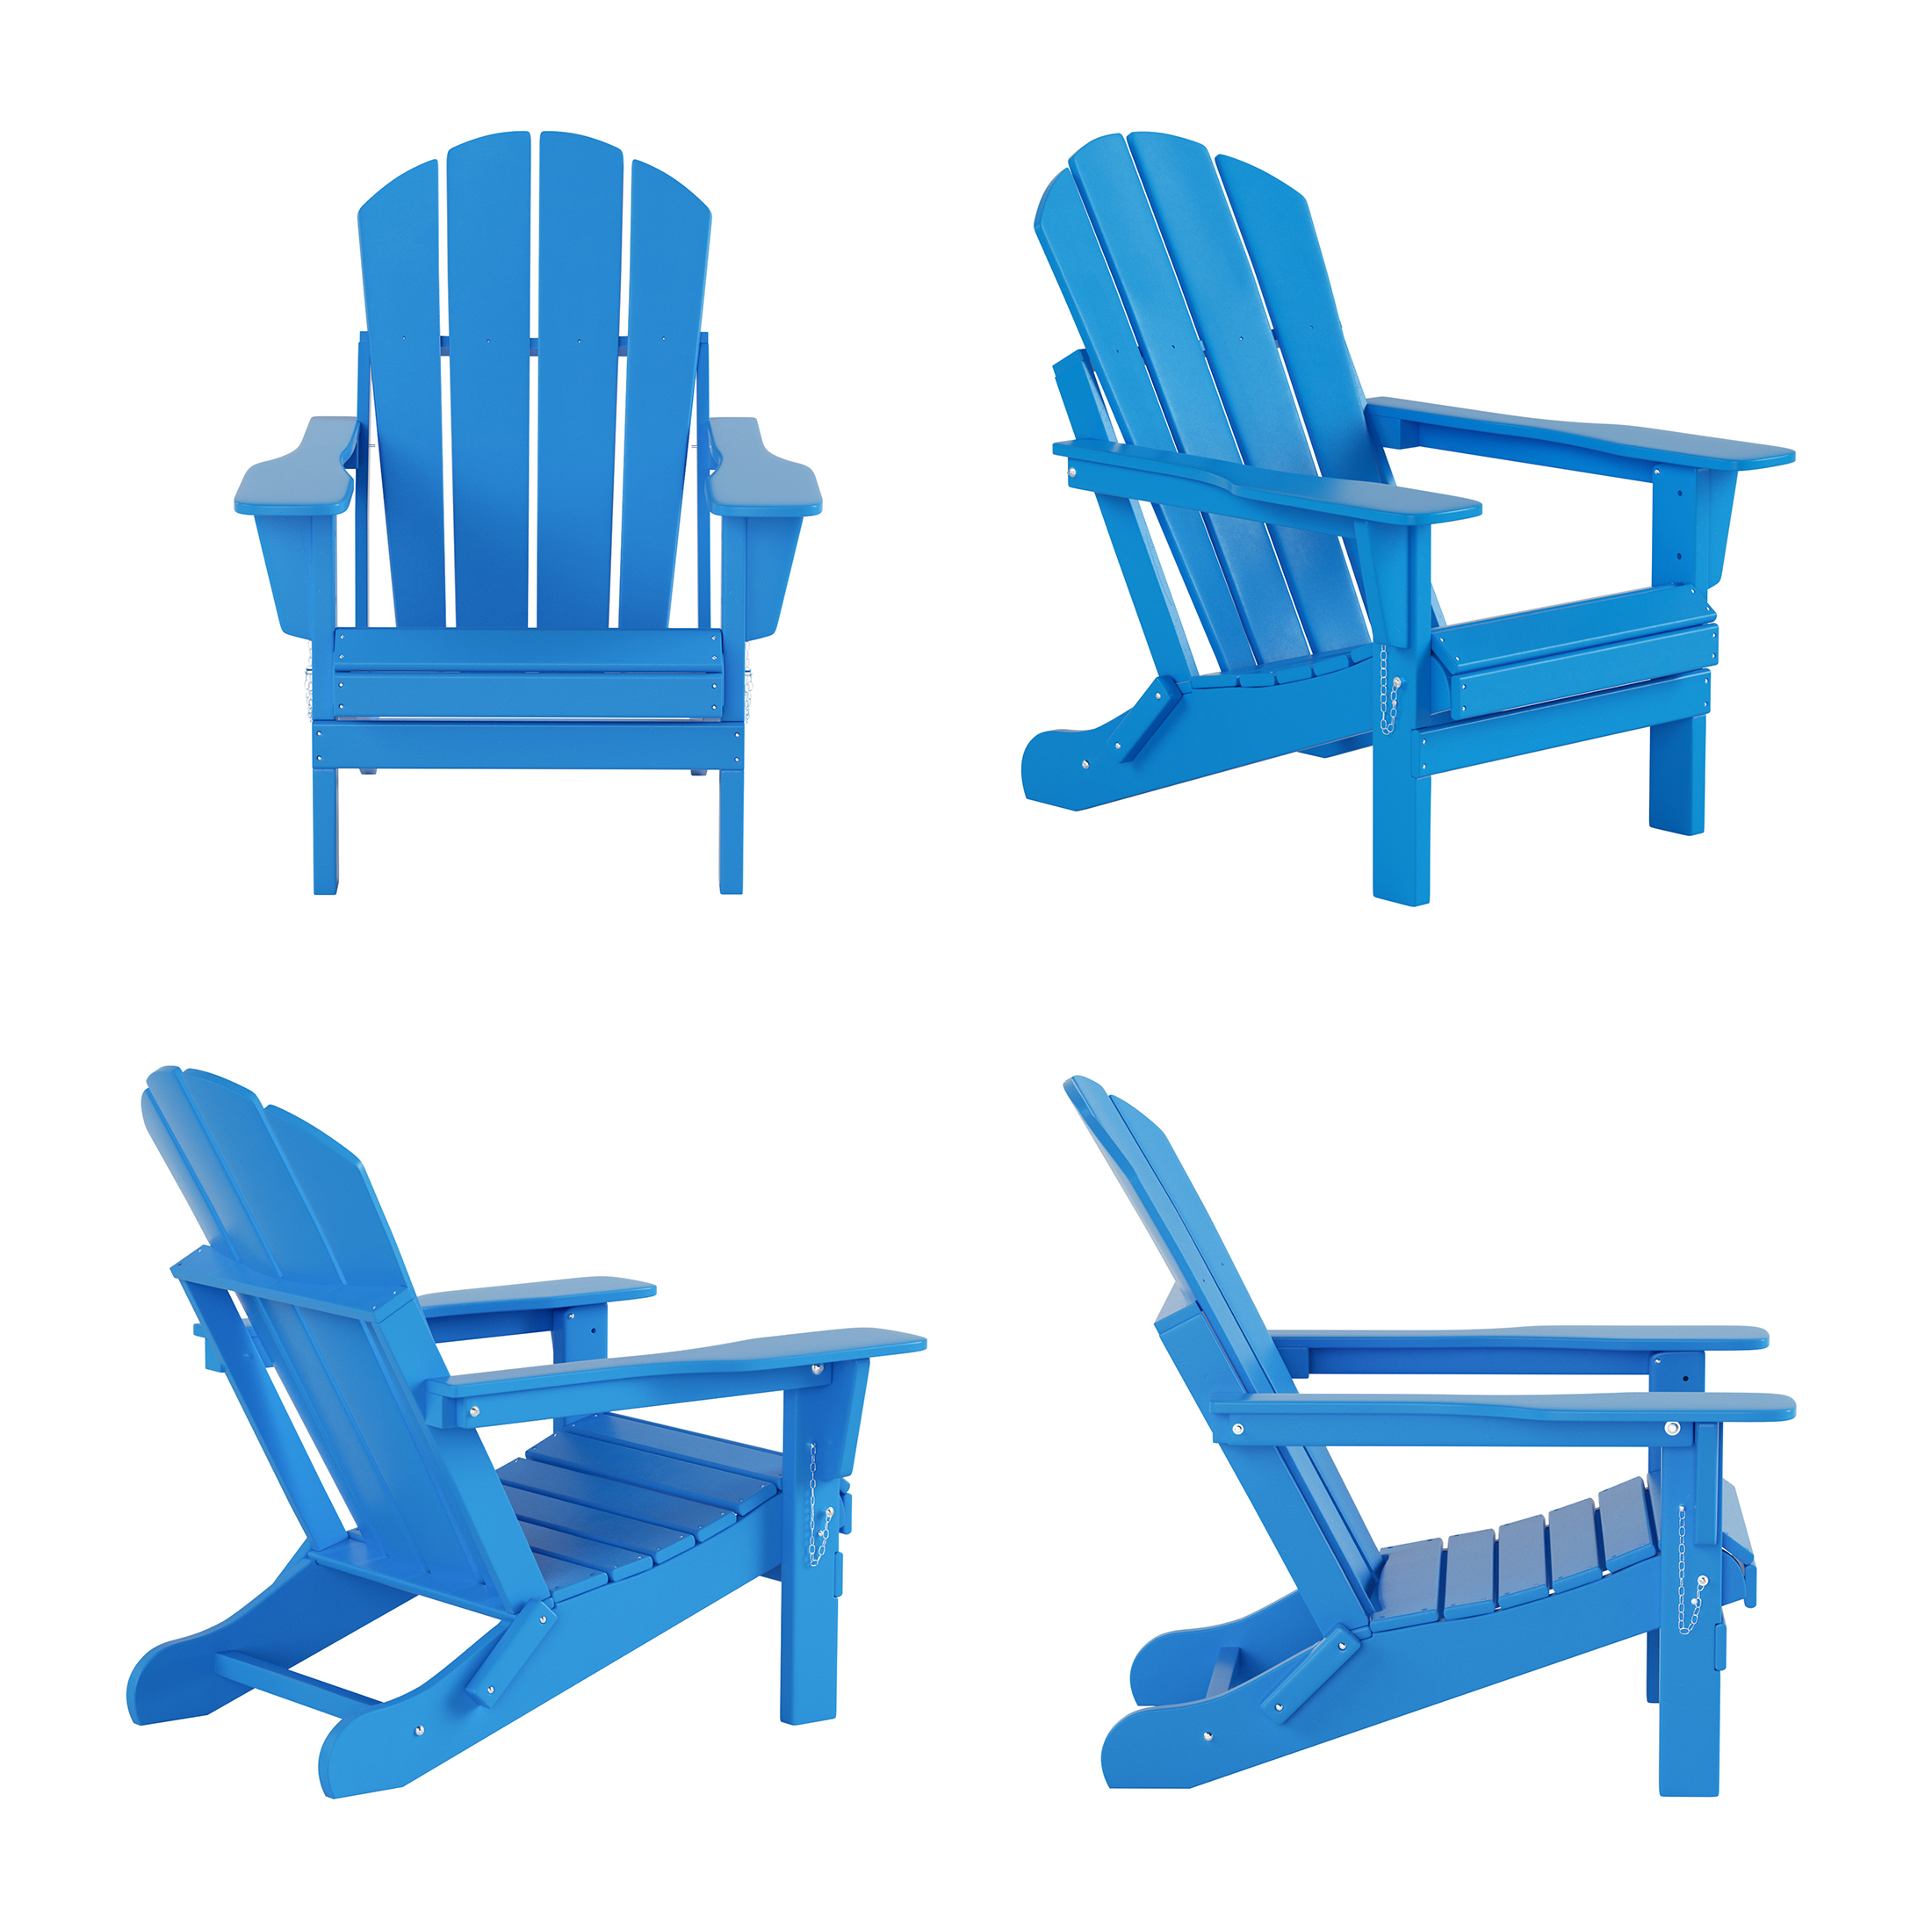 WestinTrends Malibu Outdoor Lounge Chairs, 3-Pieces Adirondack Chair Set with Ottoman and Side Table, All Weather Poly Lumber Patio Lawn Folding Chair for Outside Pool Garden Backyard, Pacific Blue - image 4 of 7